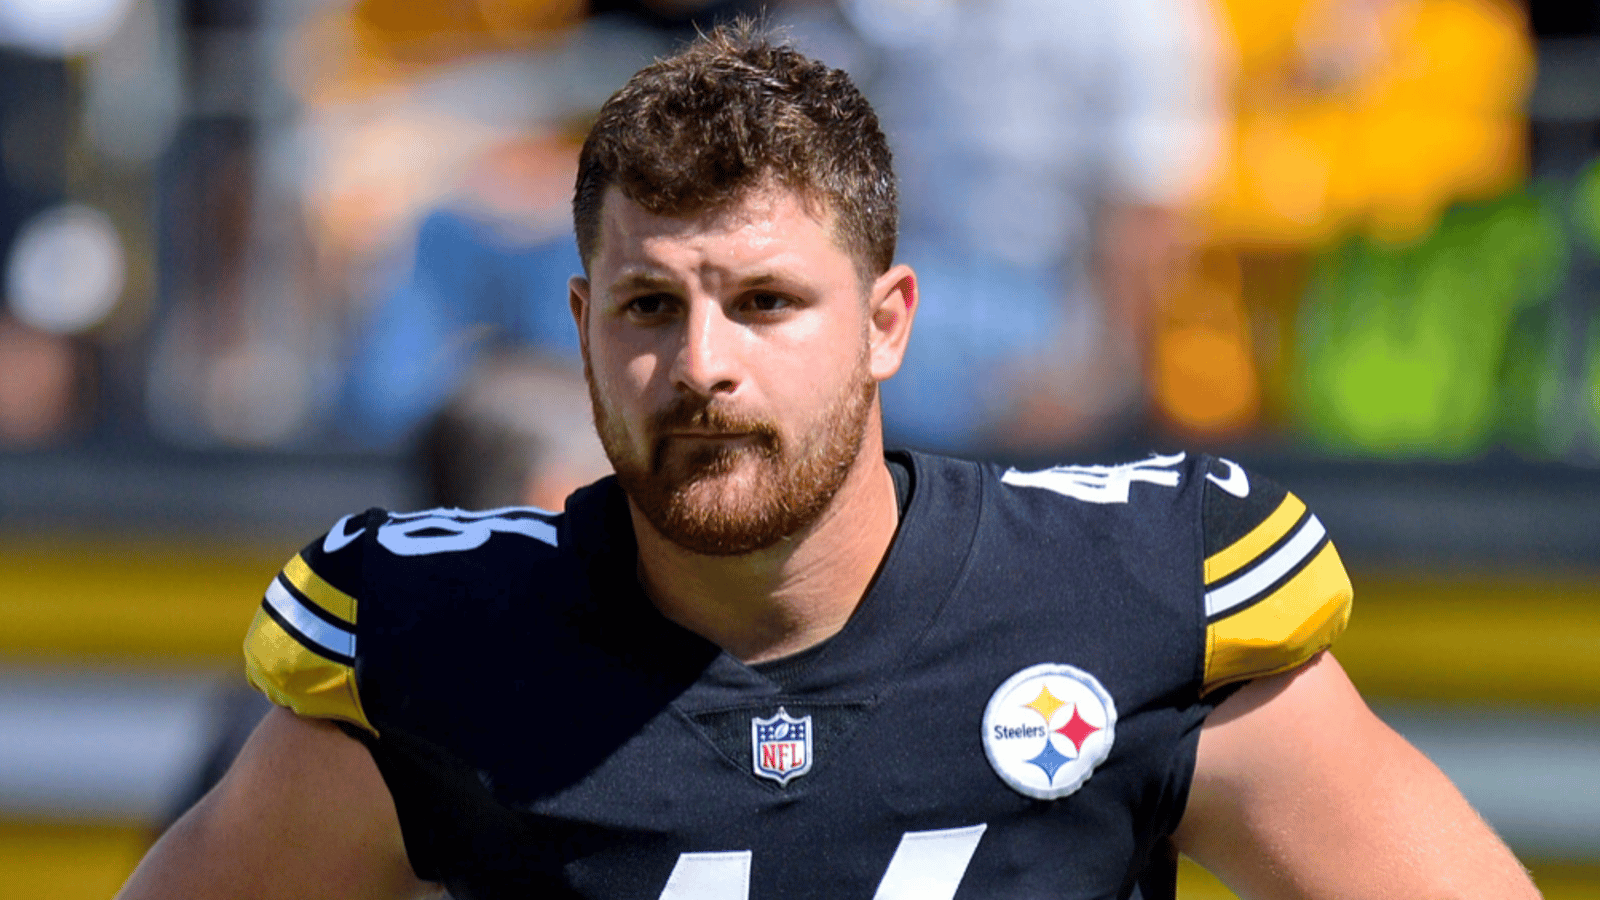 NFL punishes multiple Steelers players 